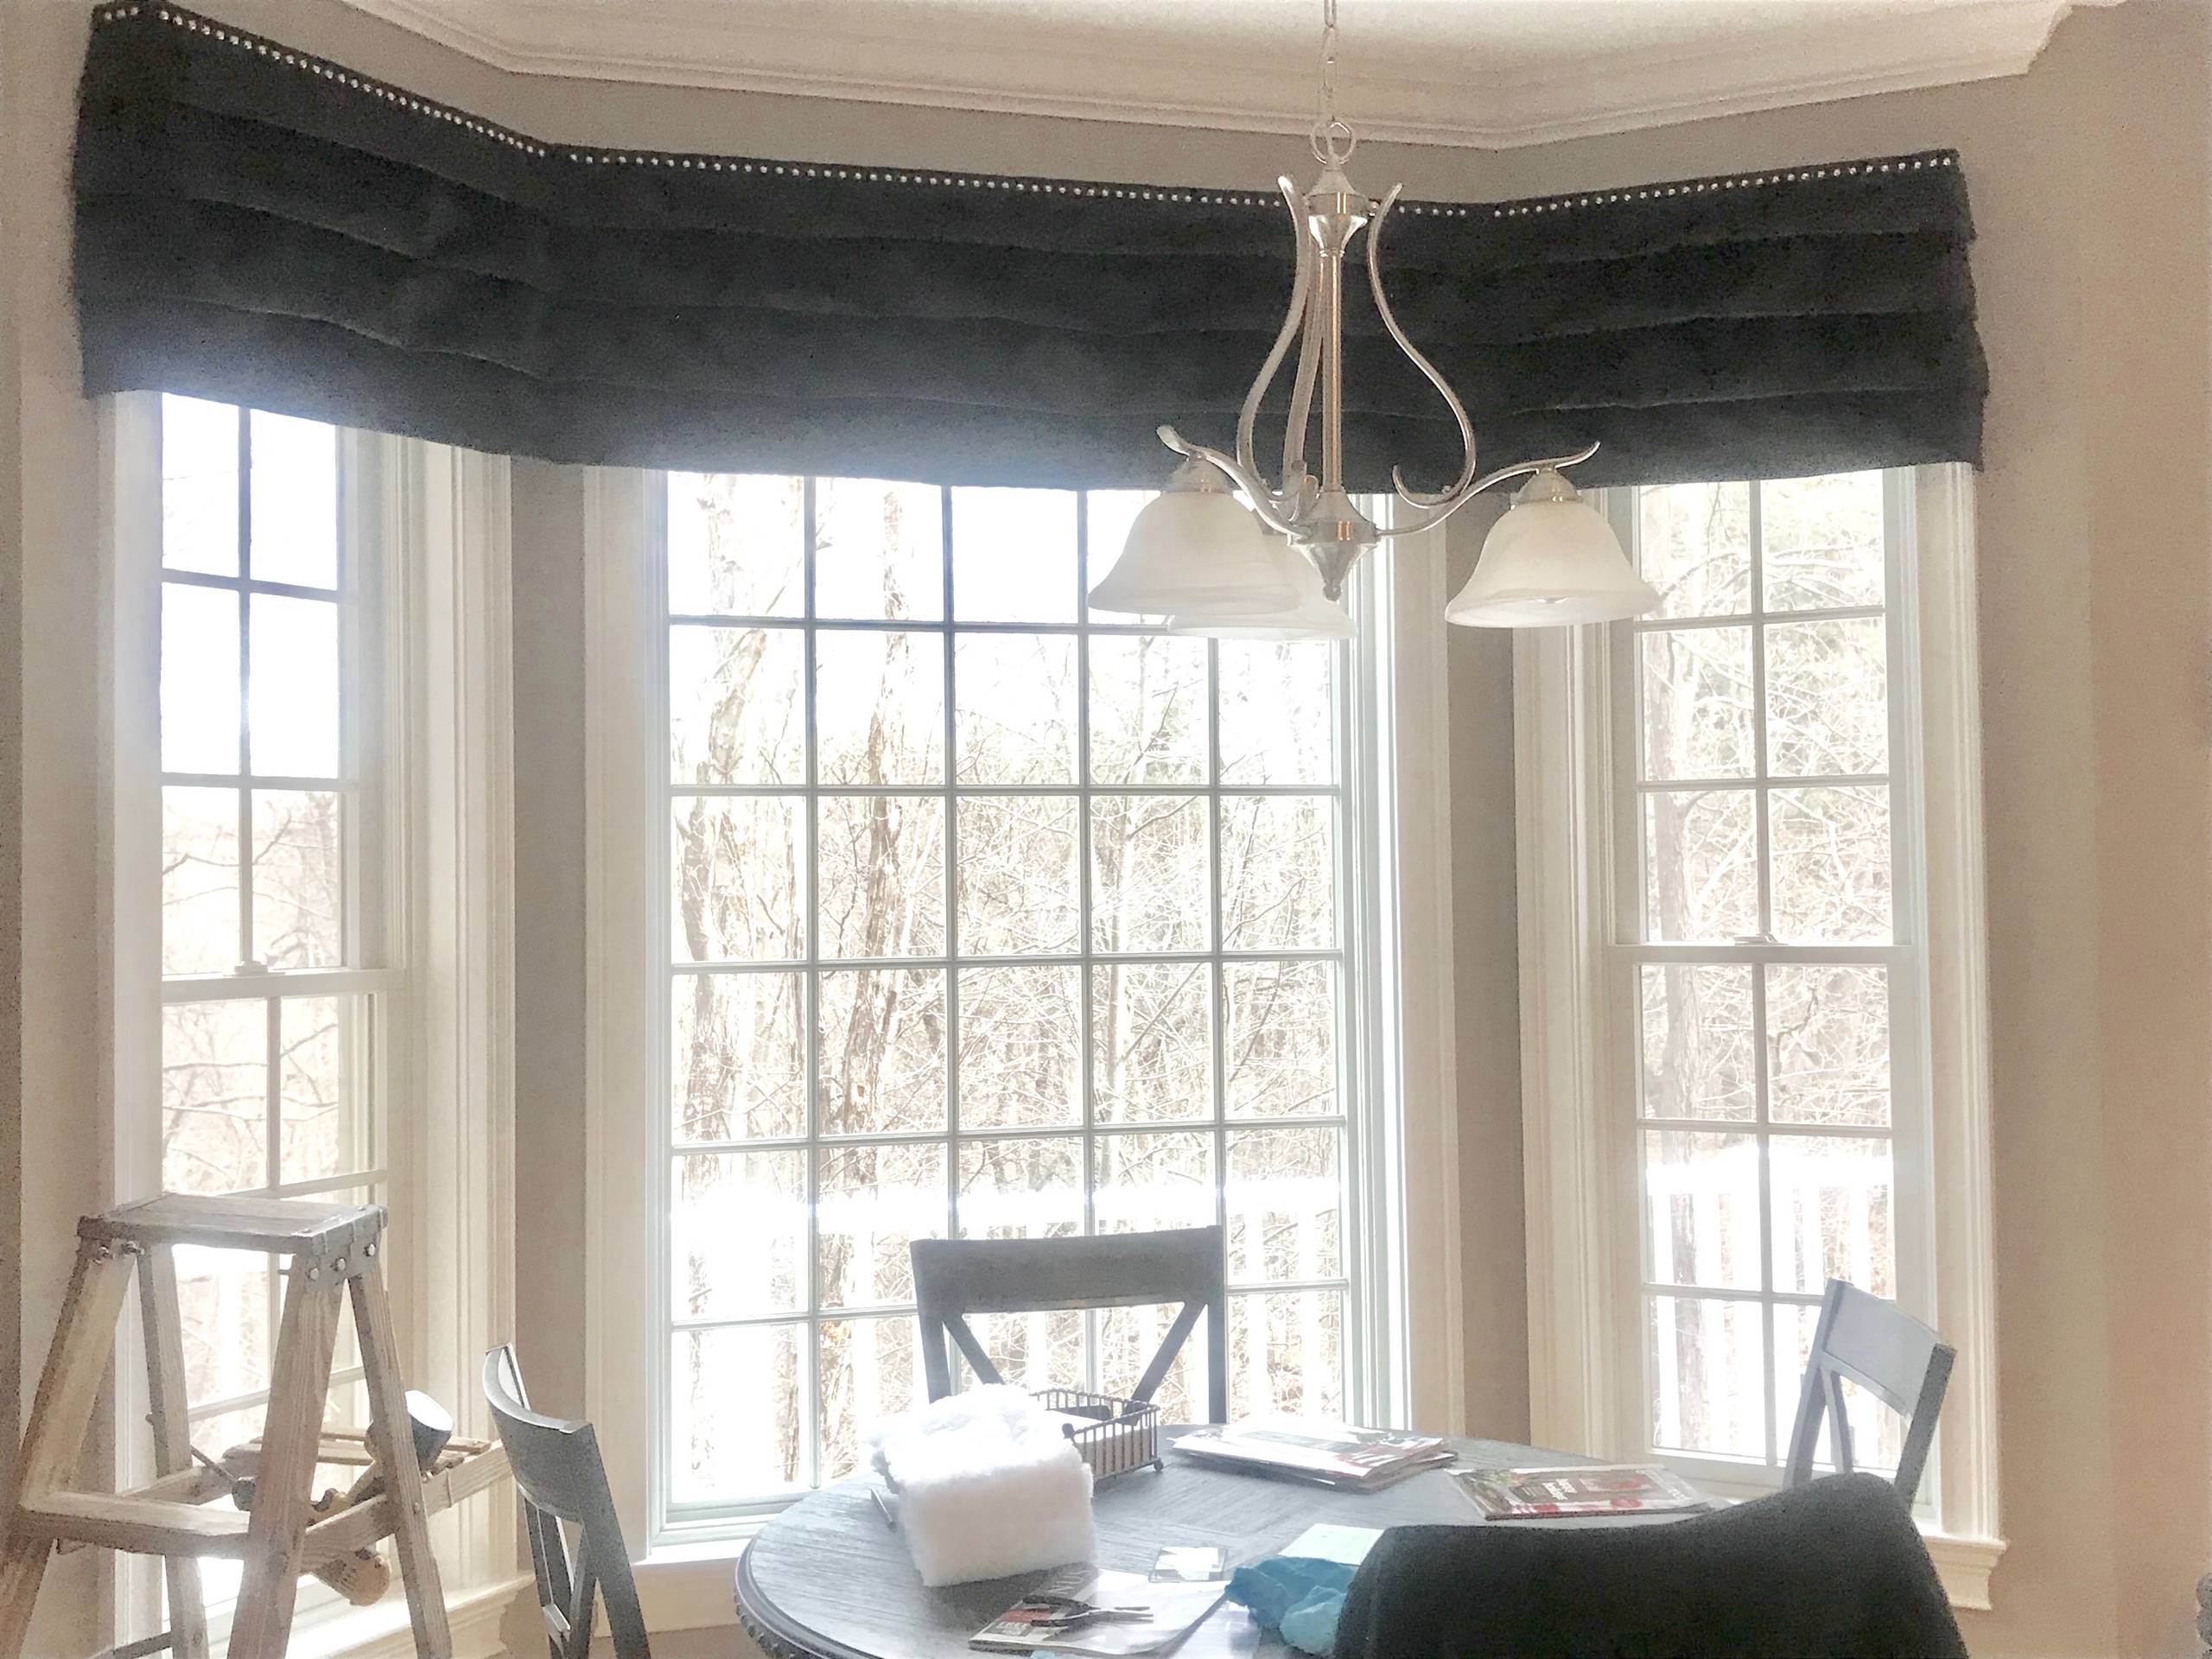 Window treatments, Drapes, Shades, Valances, Cornices, Shutters and Blinds,